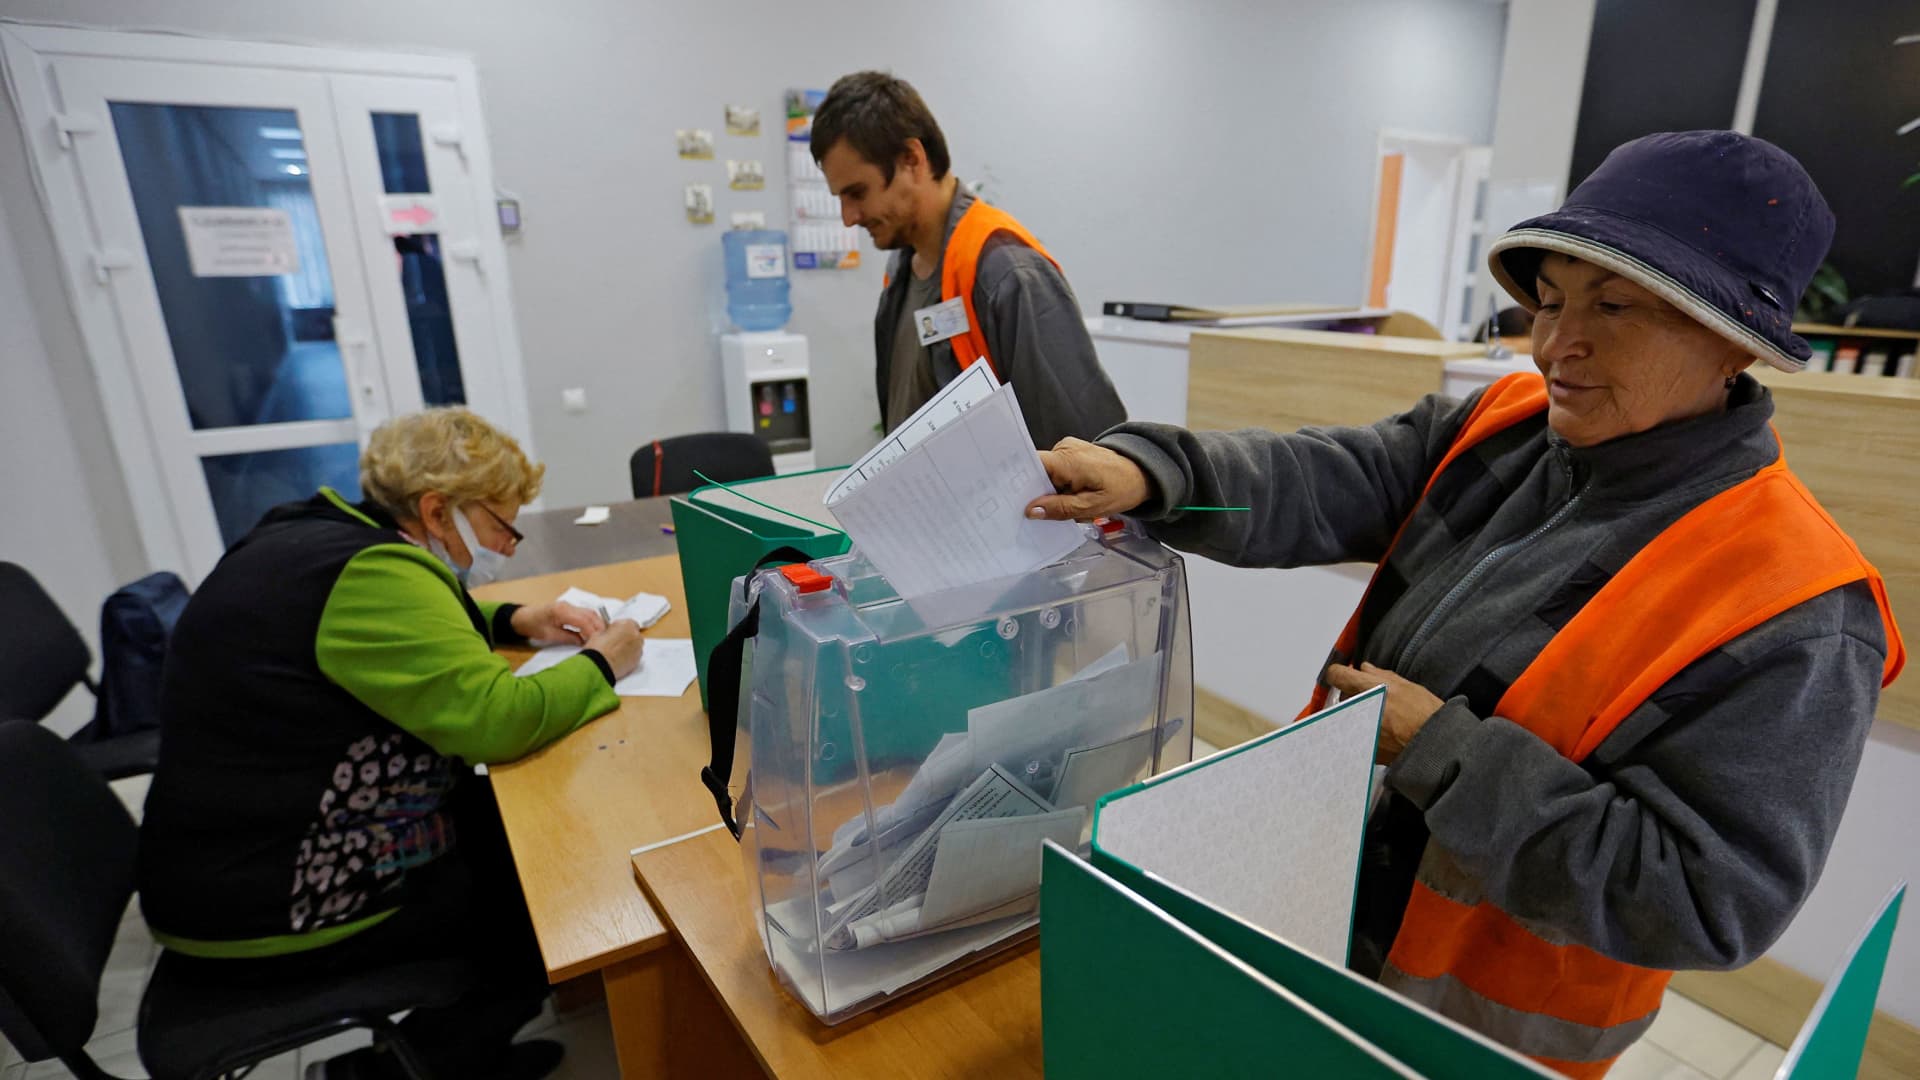 A municipal worker casts her ballot during a referendum on the secession of Zaporizhzhia region from Ukraine and its joining Russia, in the Russian-controlled city of Melitopol in the Zaporizhzhia region, Ukraine September 26, 2022. 